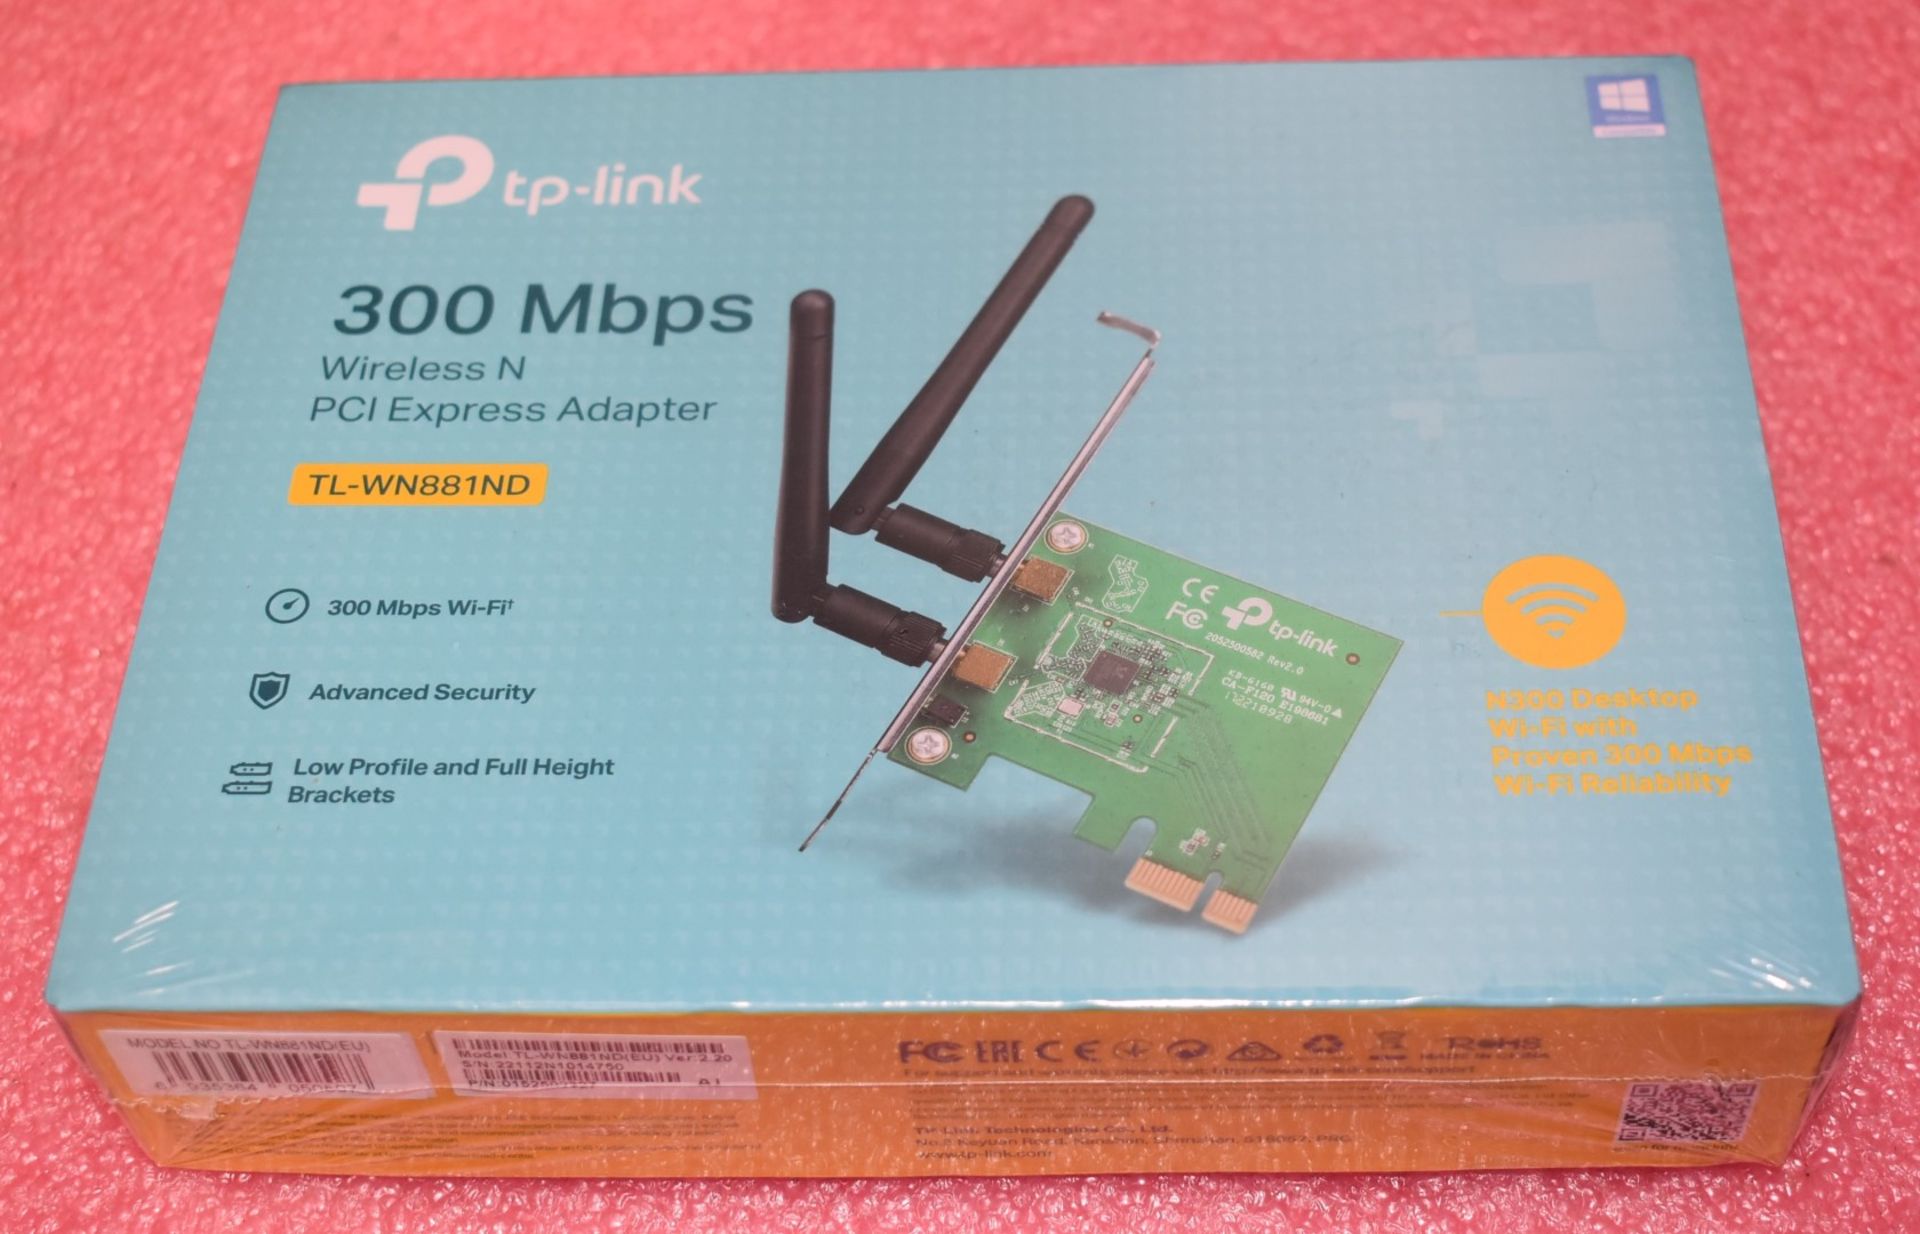 4 x TP Link 300Mbps Wireless N PCI Express Adapters - TL-WN881ND - New Sealed Stock - Image 6 of 6